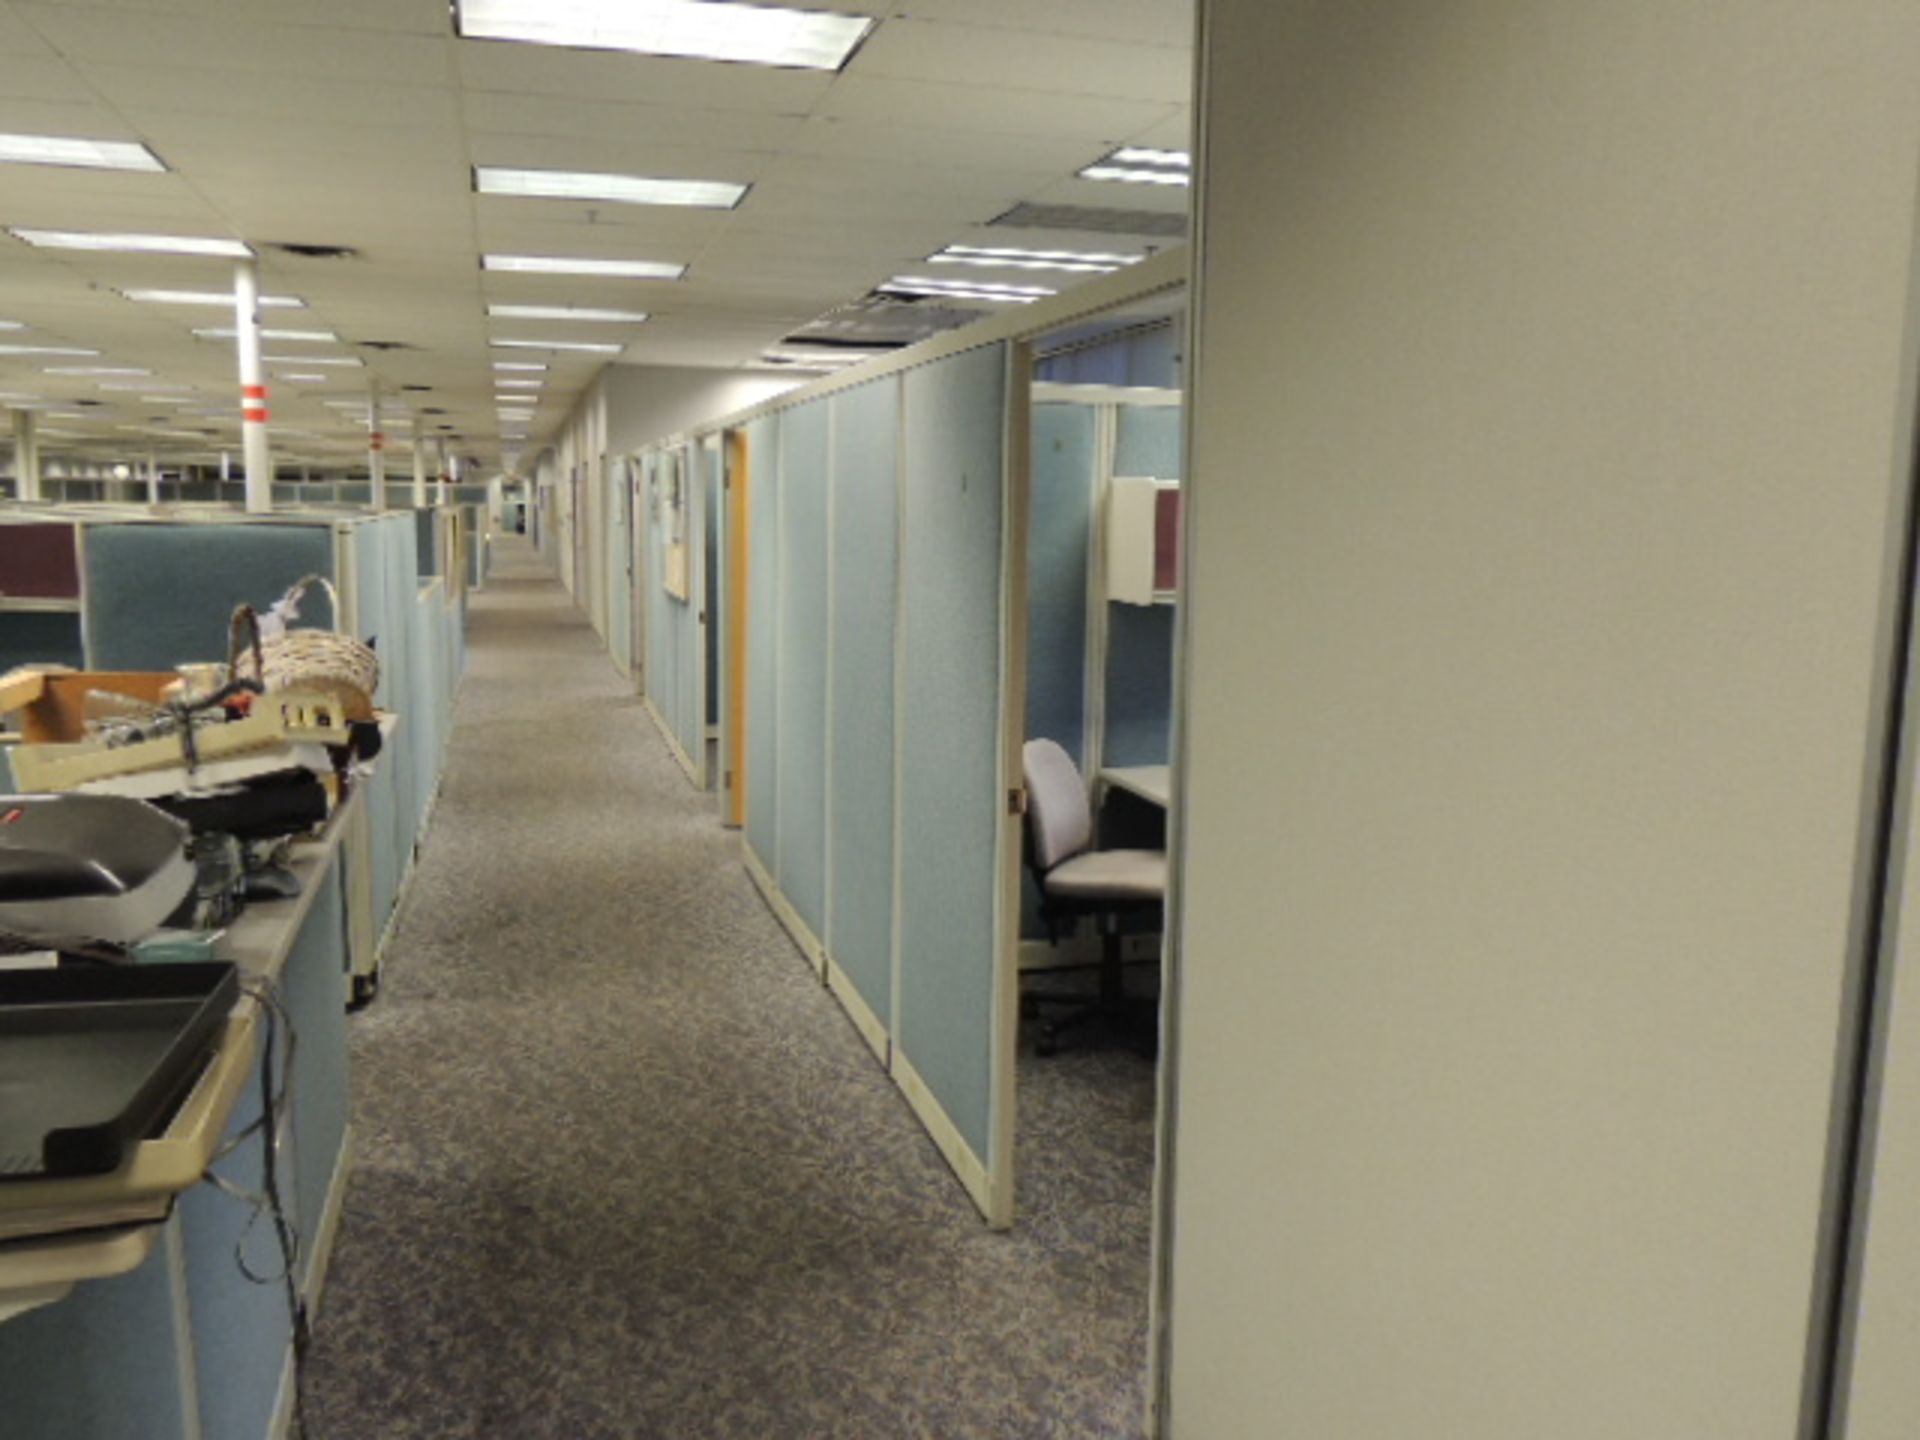 Office Cubicles & Contents. Lot: (8) offices w/ wooden and metal desks, file cabinets and lateral - Image 31 of 47